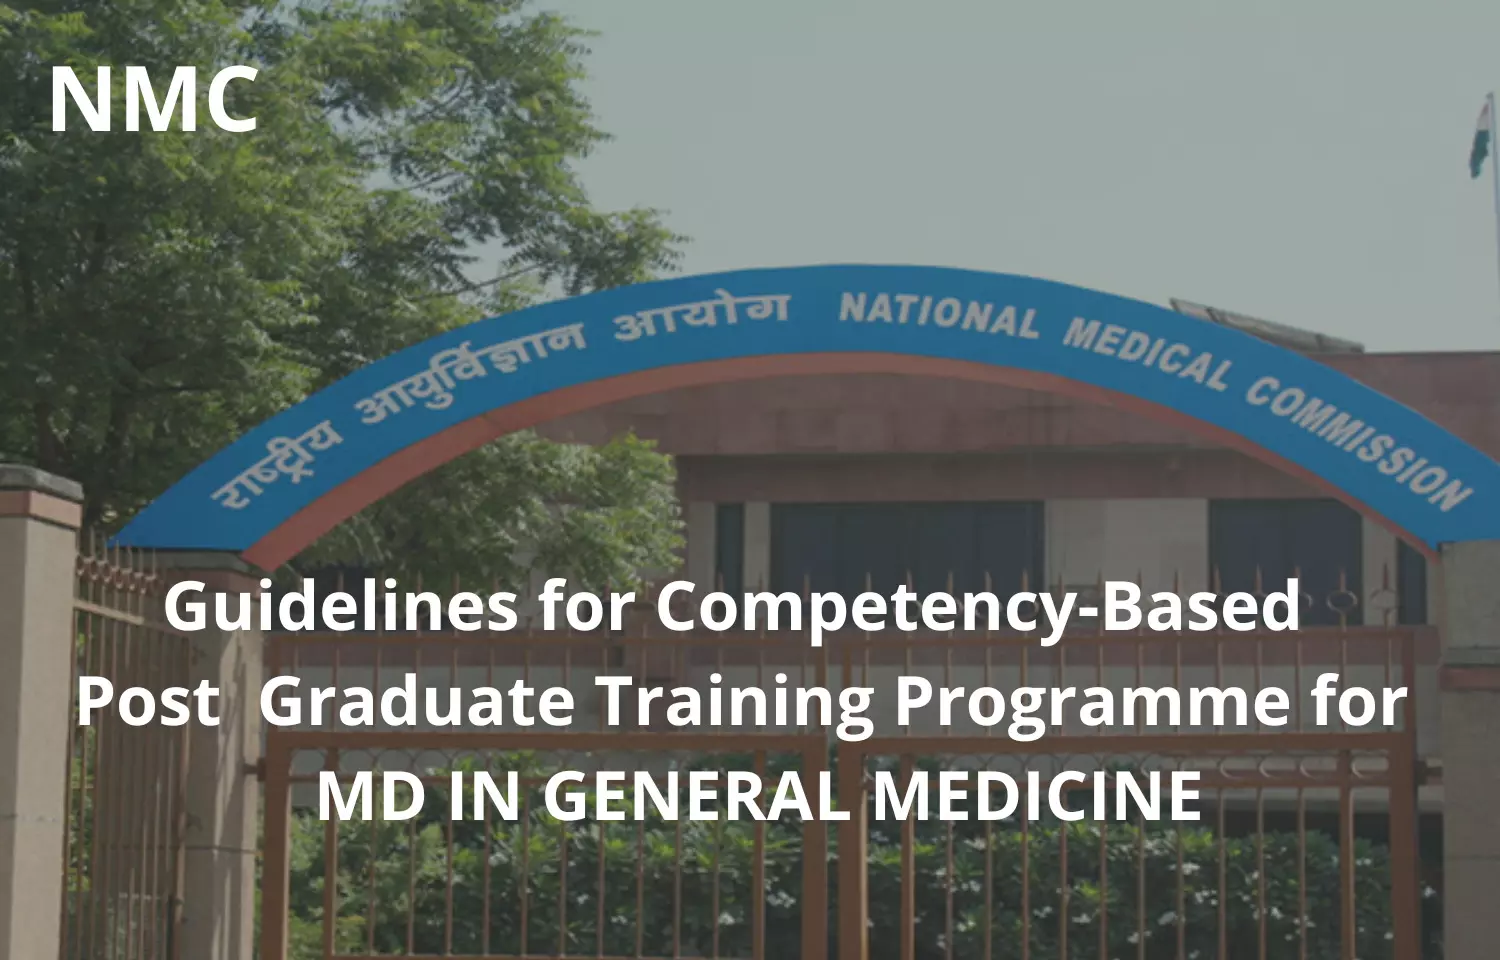 NMC Guidelines for Competency-Based Postgraduate Training Programme For MD In General Medicine